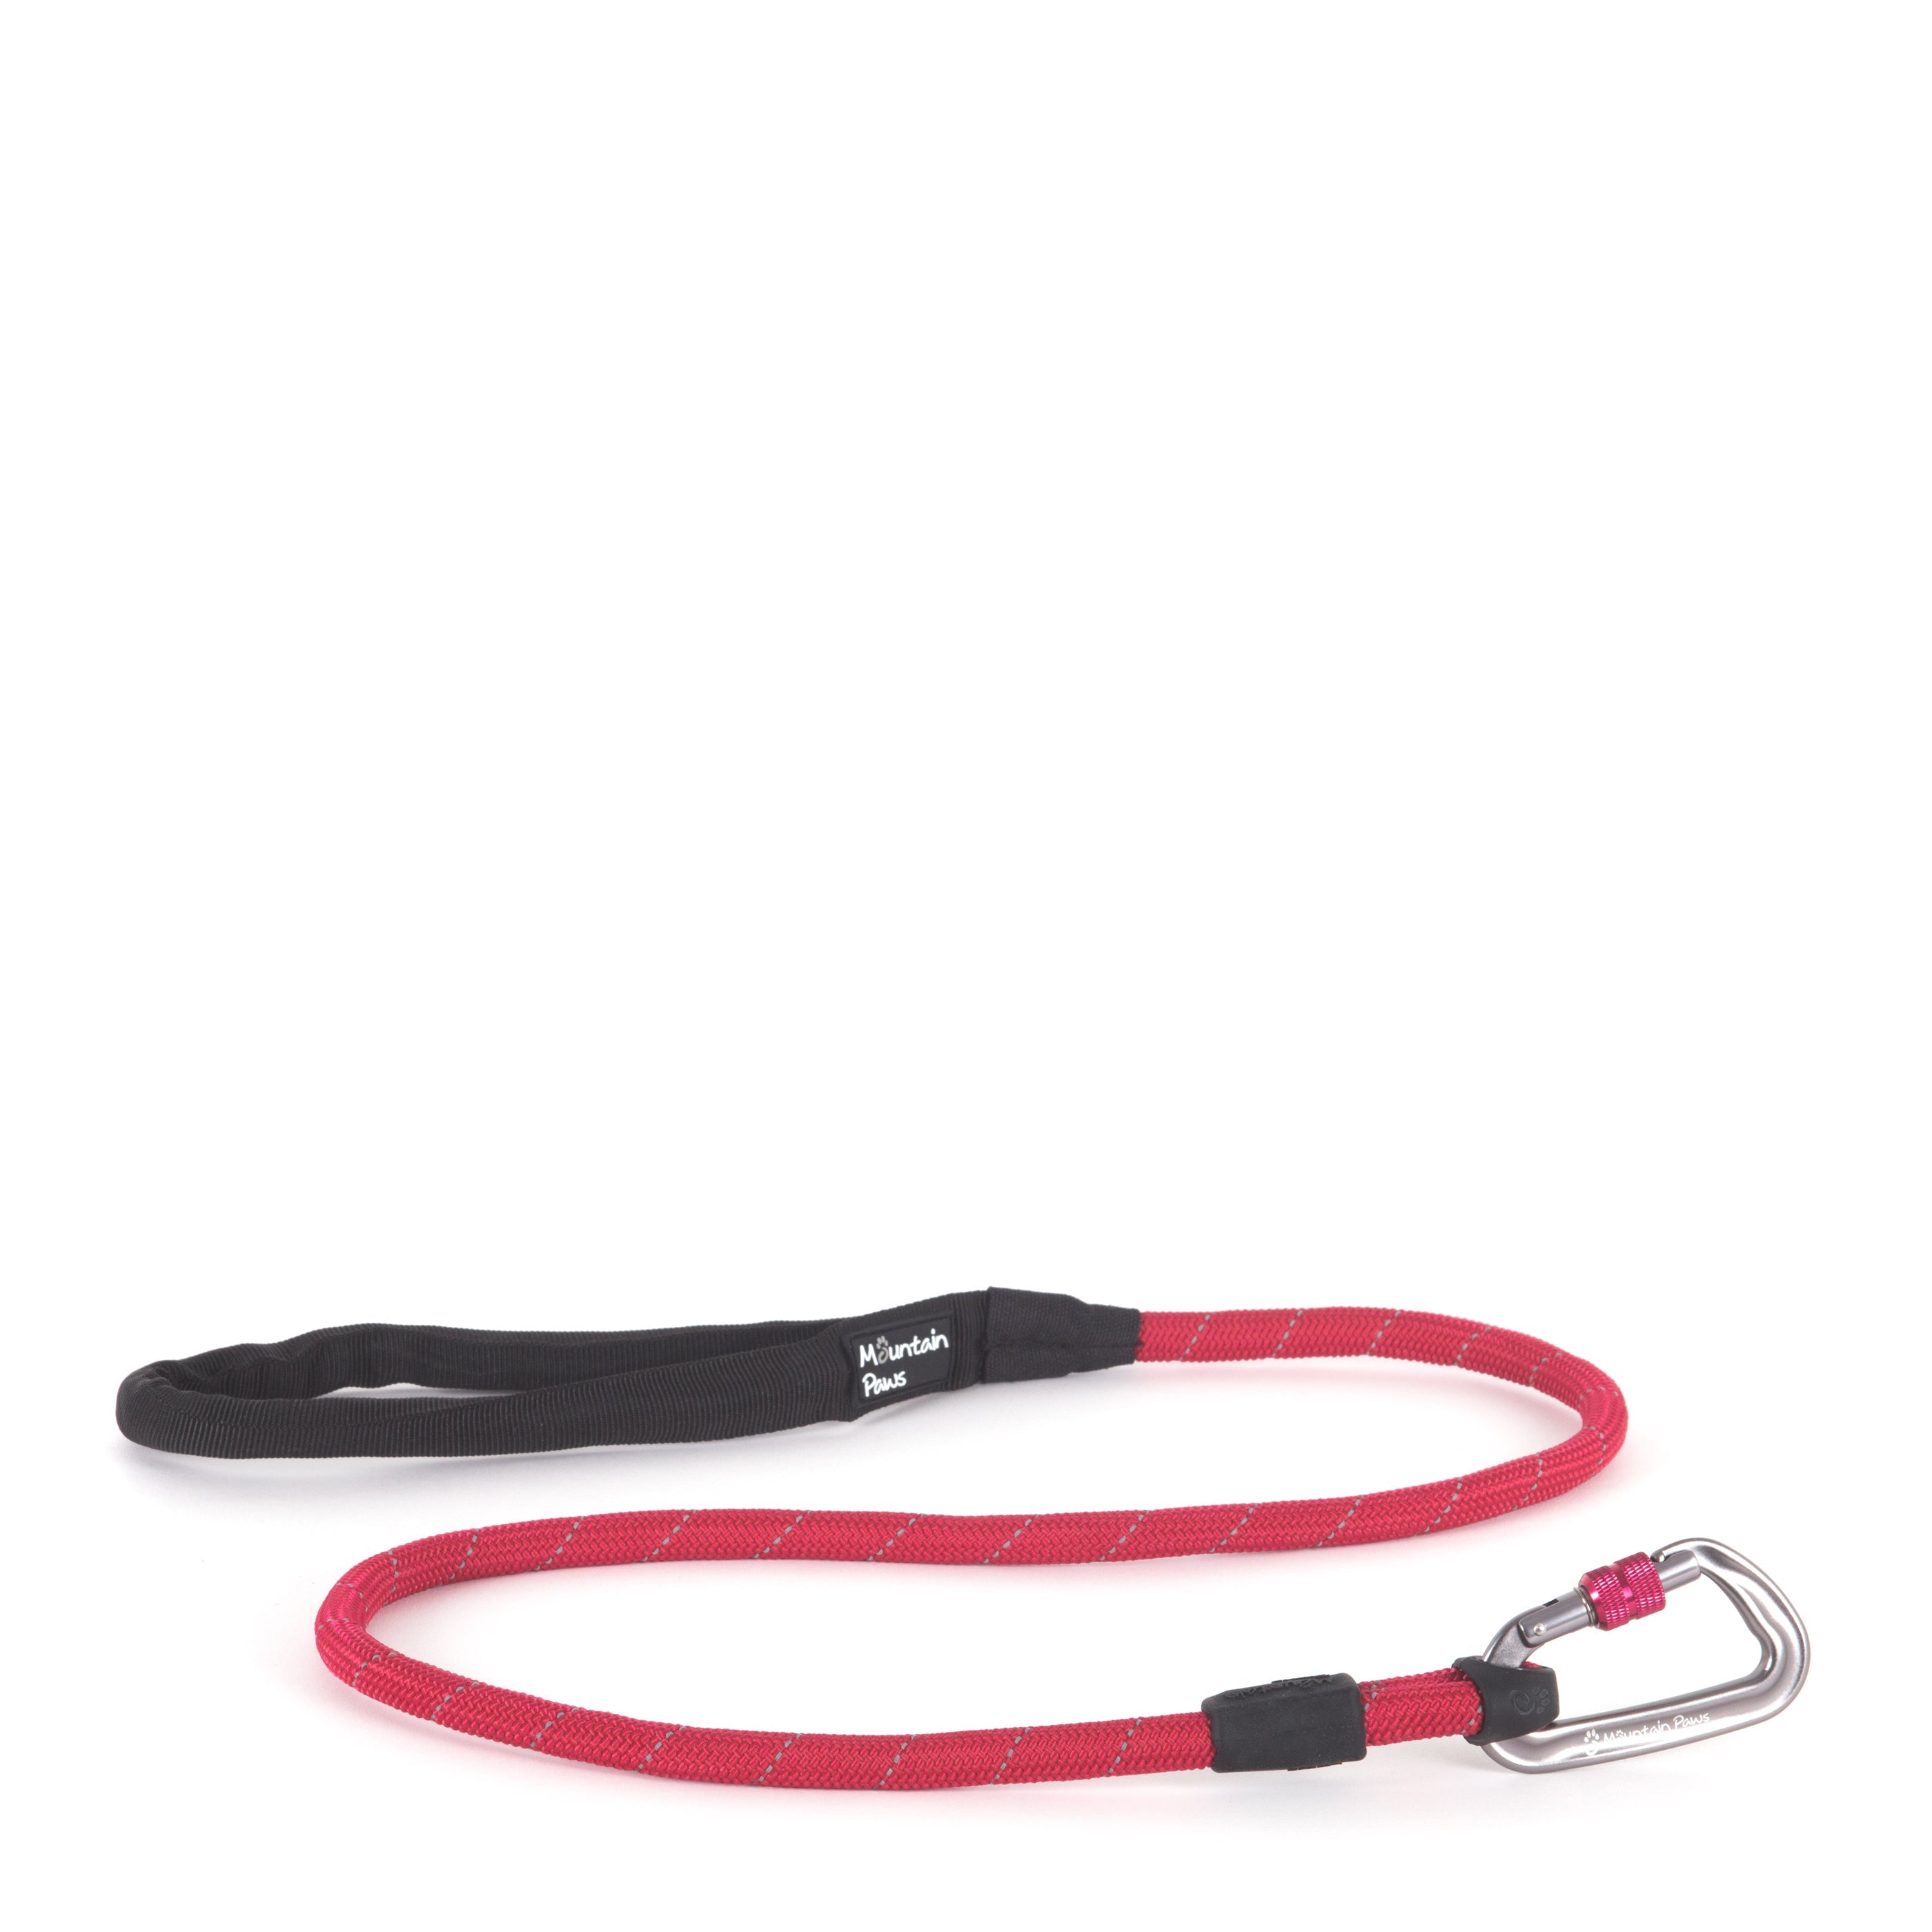 Rope Dog Lead - variant[Red]